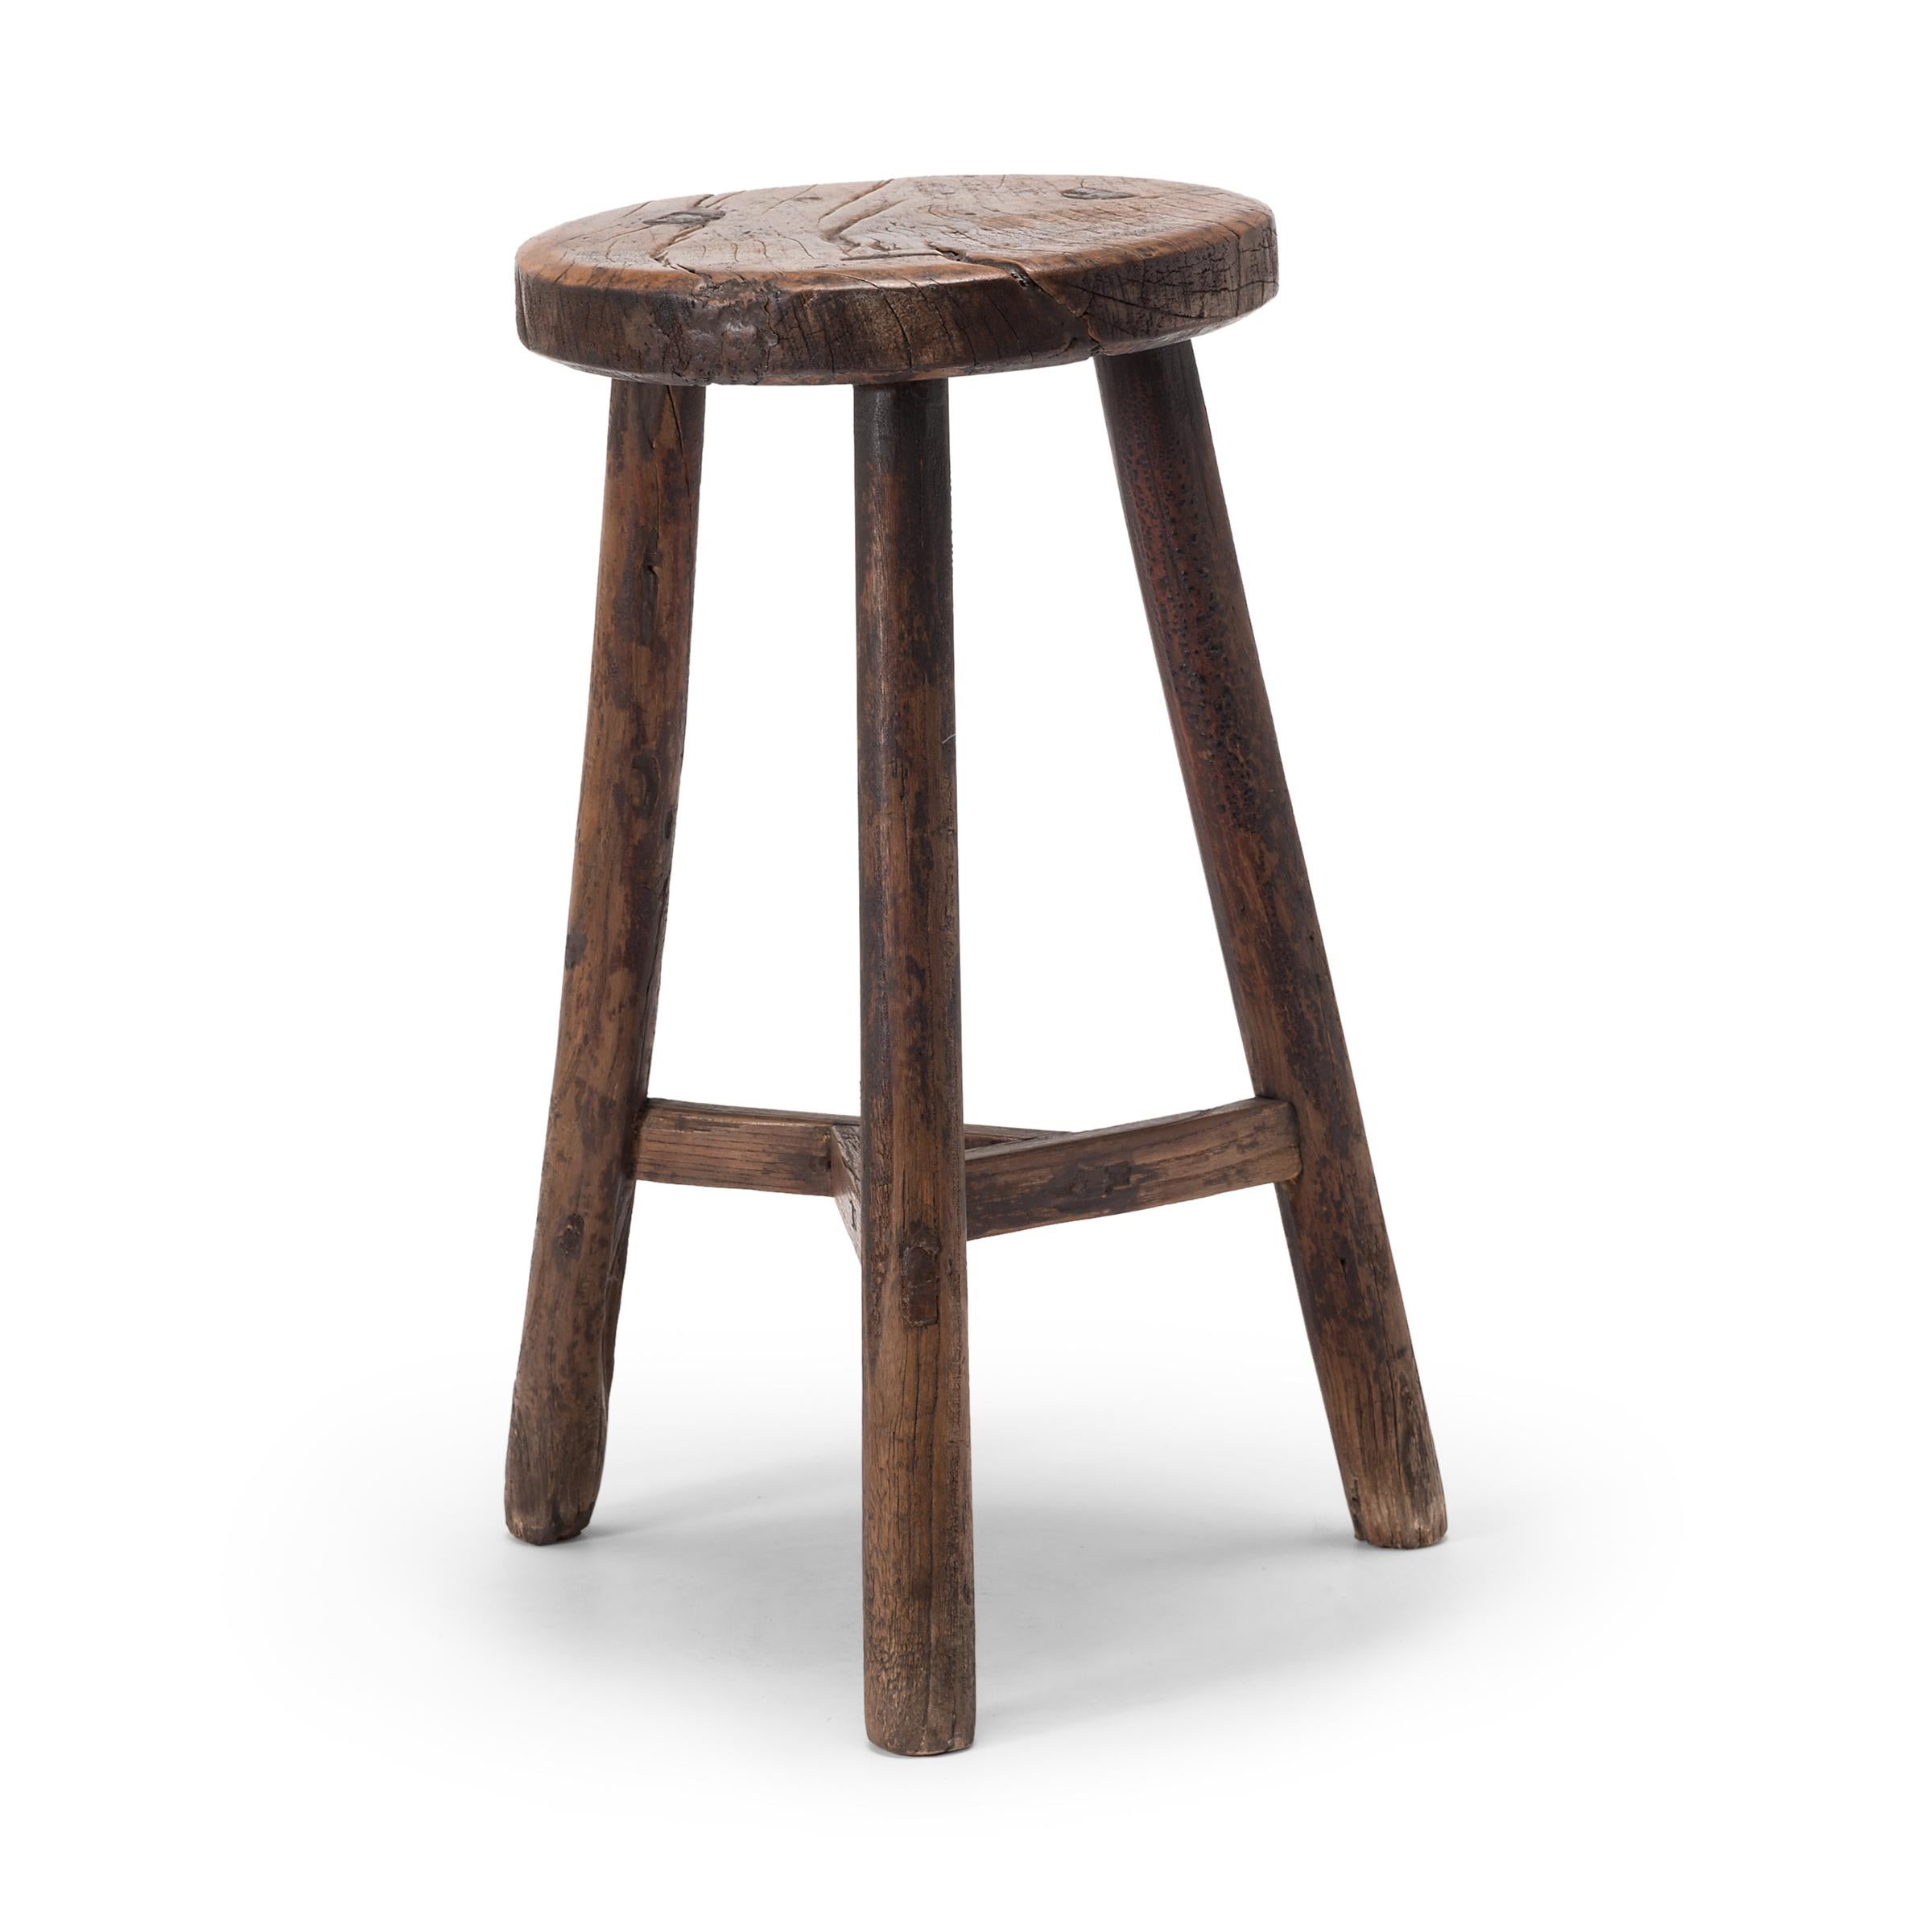 This 19th century stool from China's Shanxi province charms with its simple form and dark finish. The stool's round seat is cut from burled elmwood and embraces the notion of 